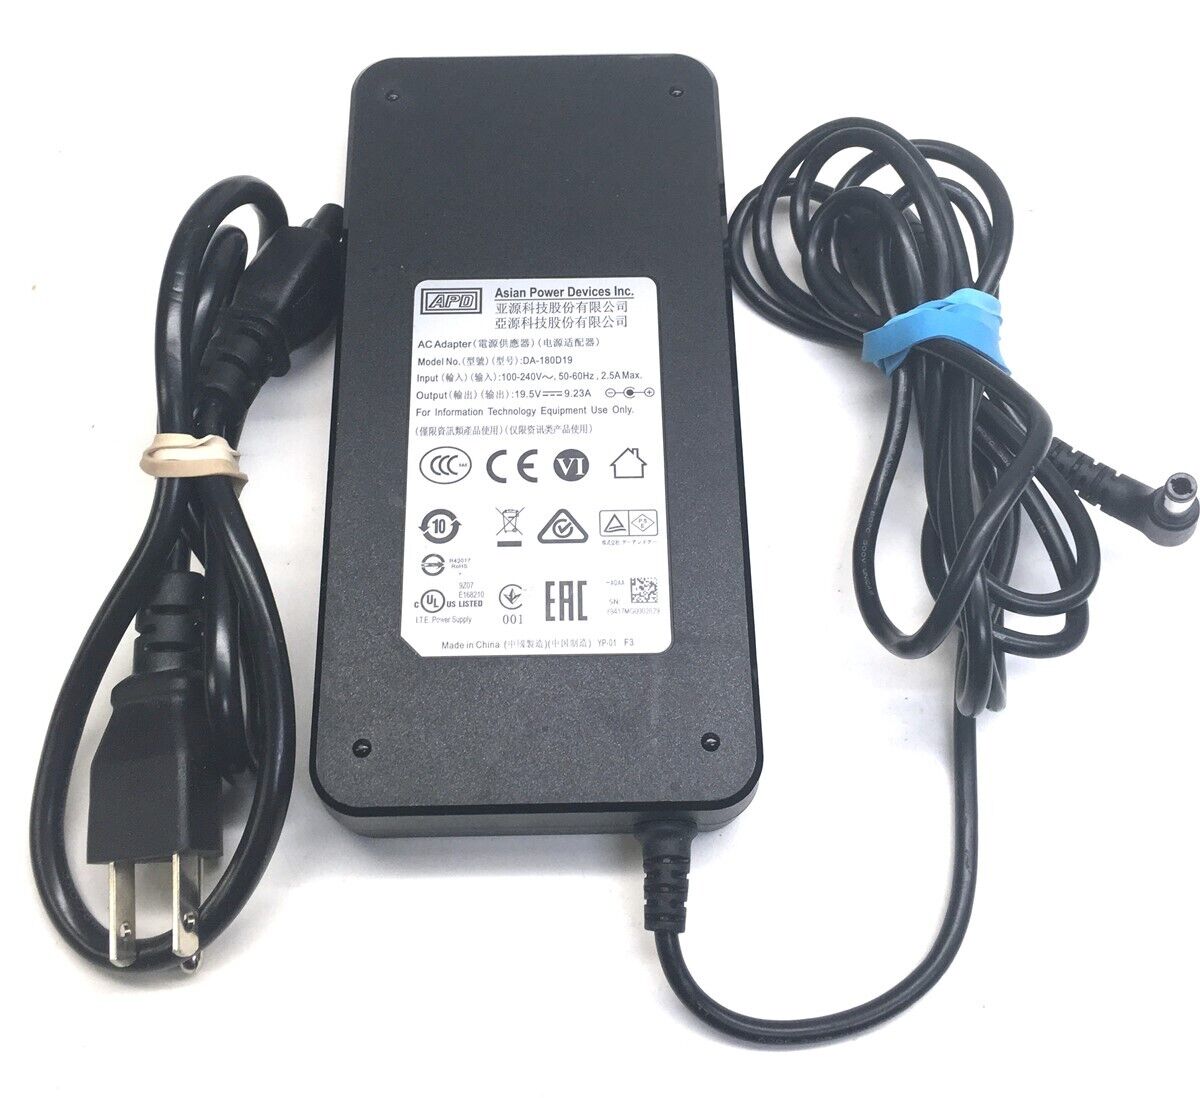 APD AC Adapter Power Supply for Clevo Sager Laptop DA-180D19 19.5V 9.23A 180W Item Condition: Un